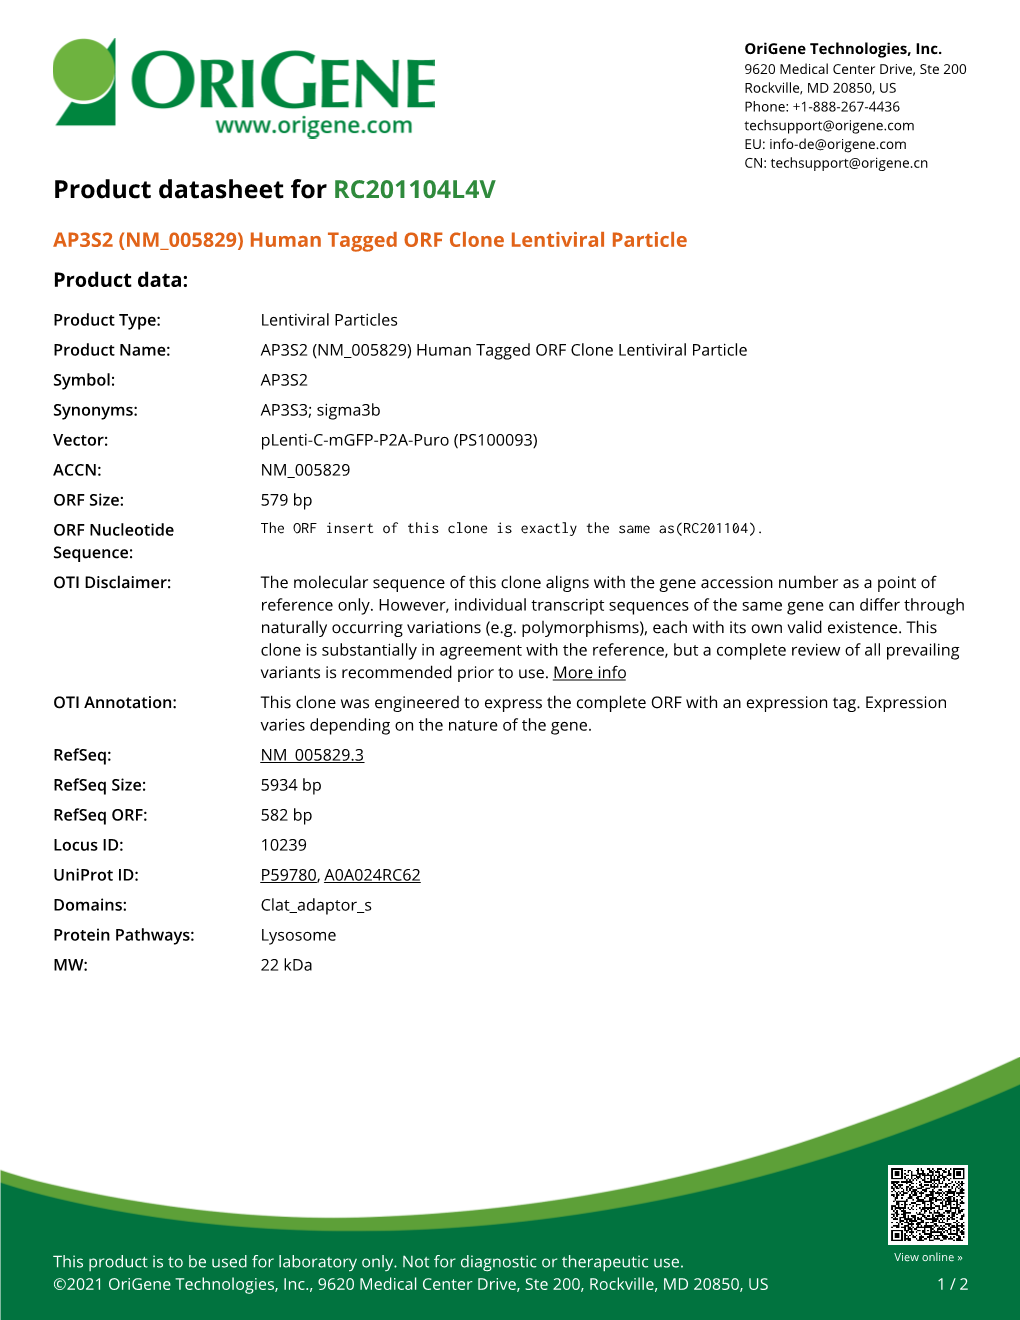 AP3S2 (NM 005829) Human Tagged ORF Clone Lentiviral Particle Product Data